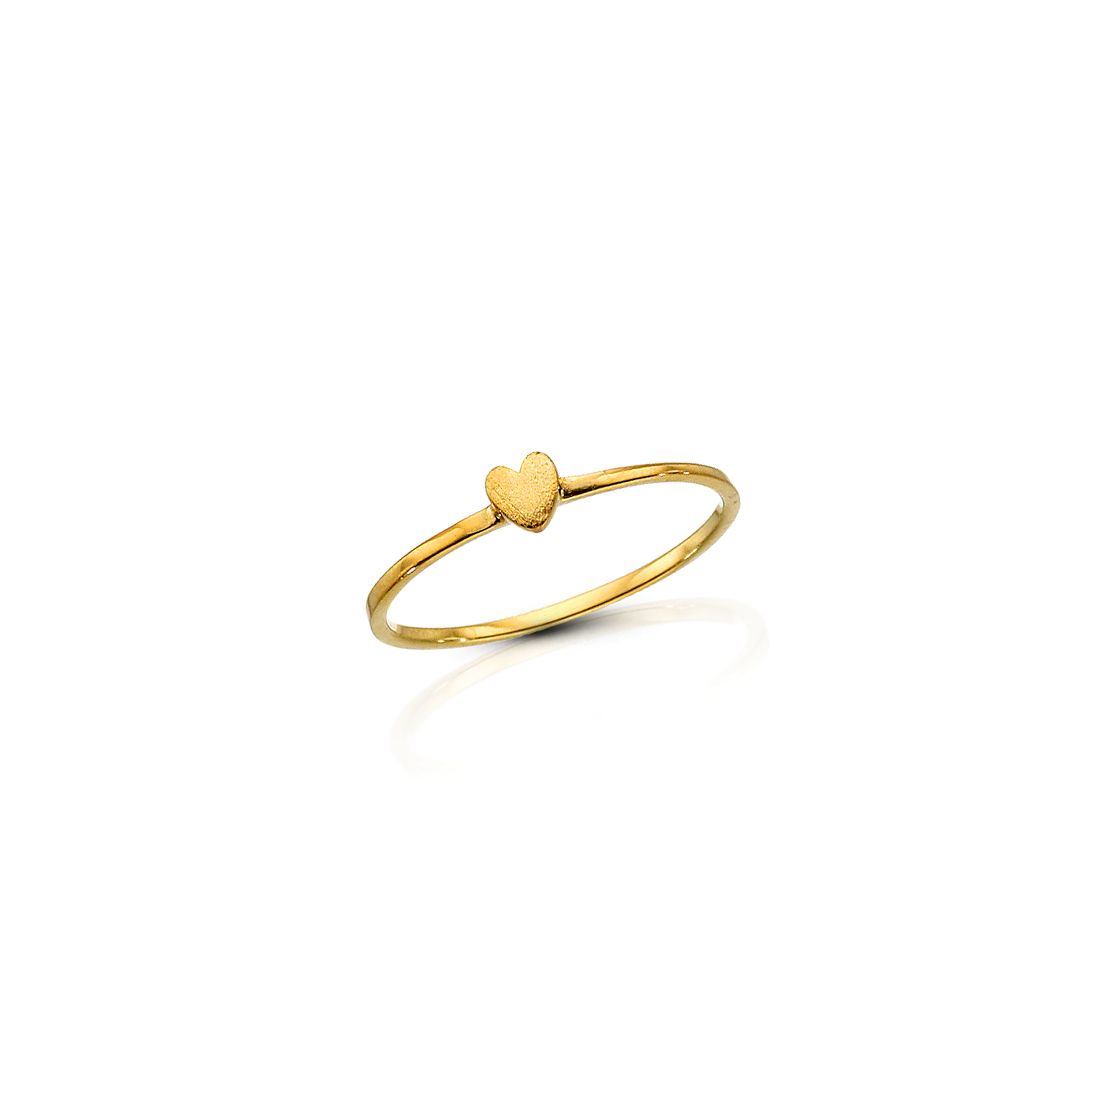 Simple gold band with a gold heart.